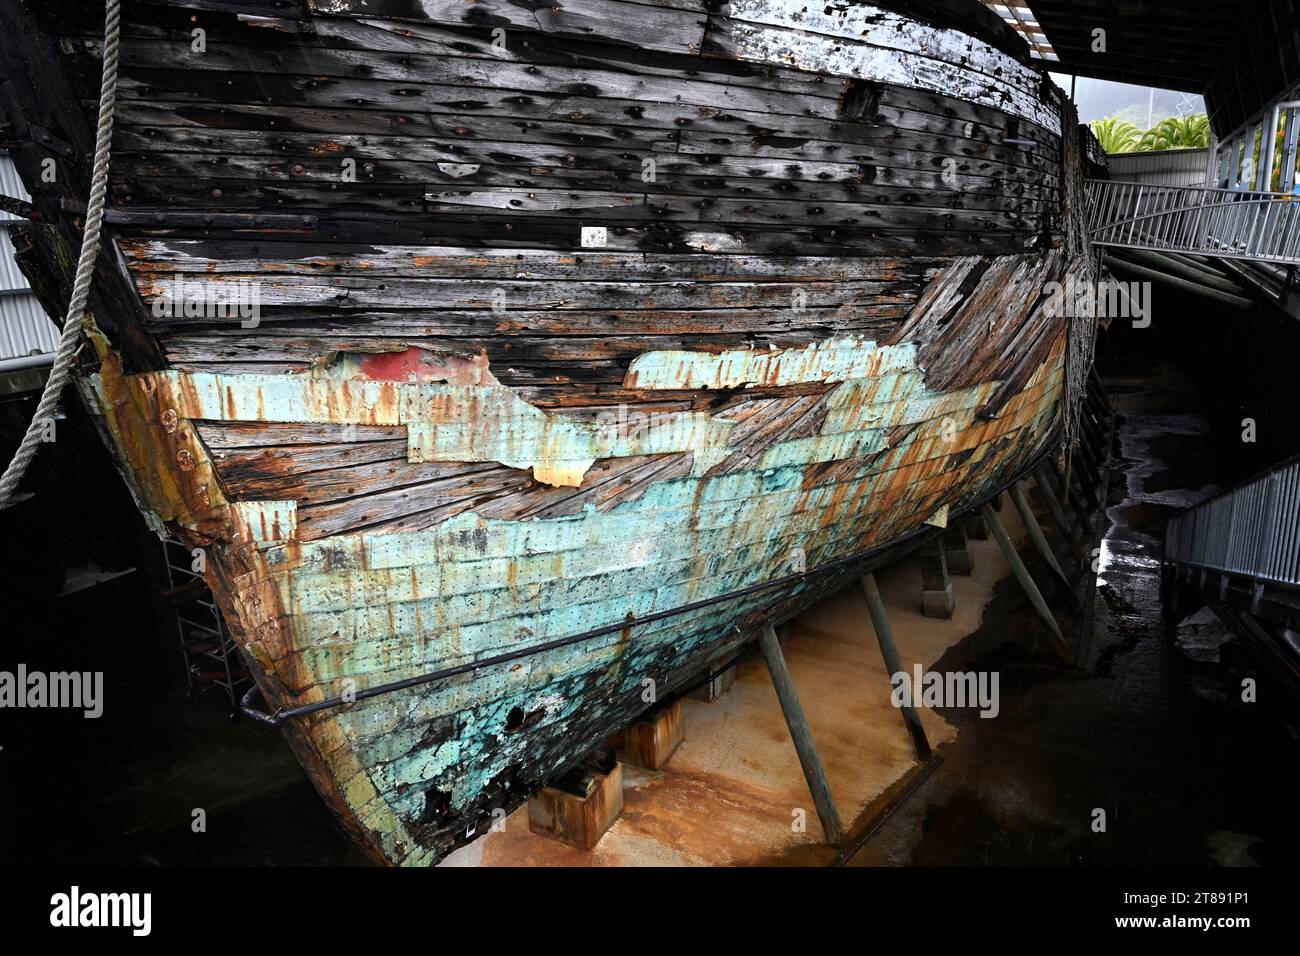 Edwin Fox Sailing Ship Hull in Dry  Dock, Picton New Zealand. The oldest Merchant Ship in The World. The world's last surviving East Indianman. Stock Photo